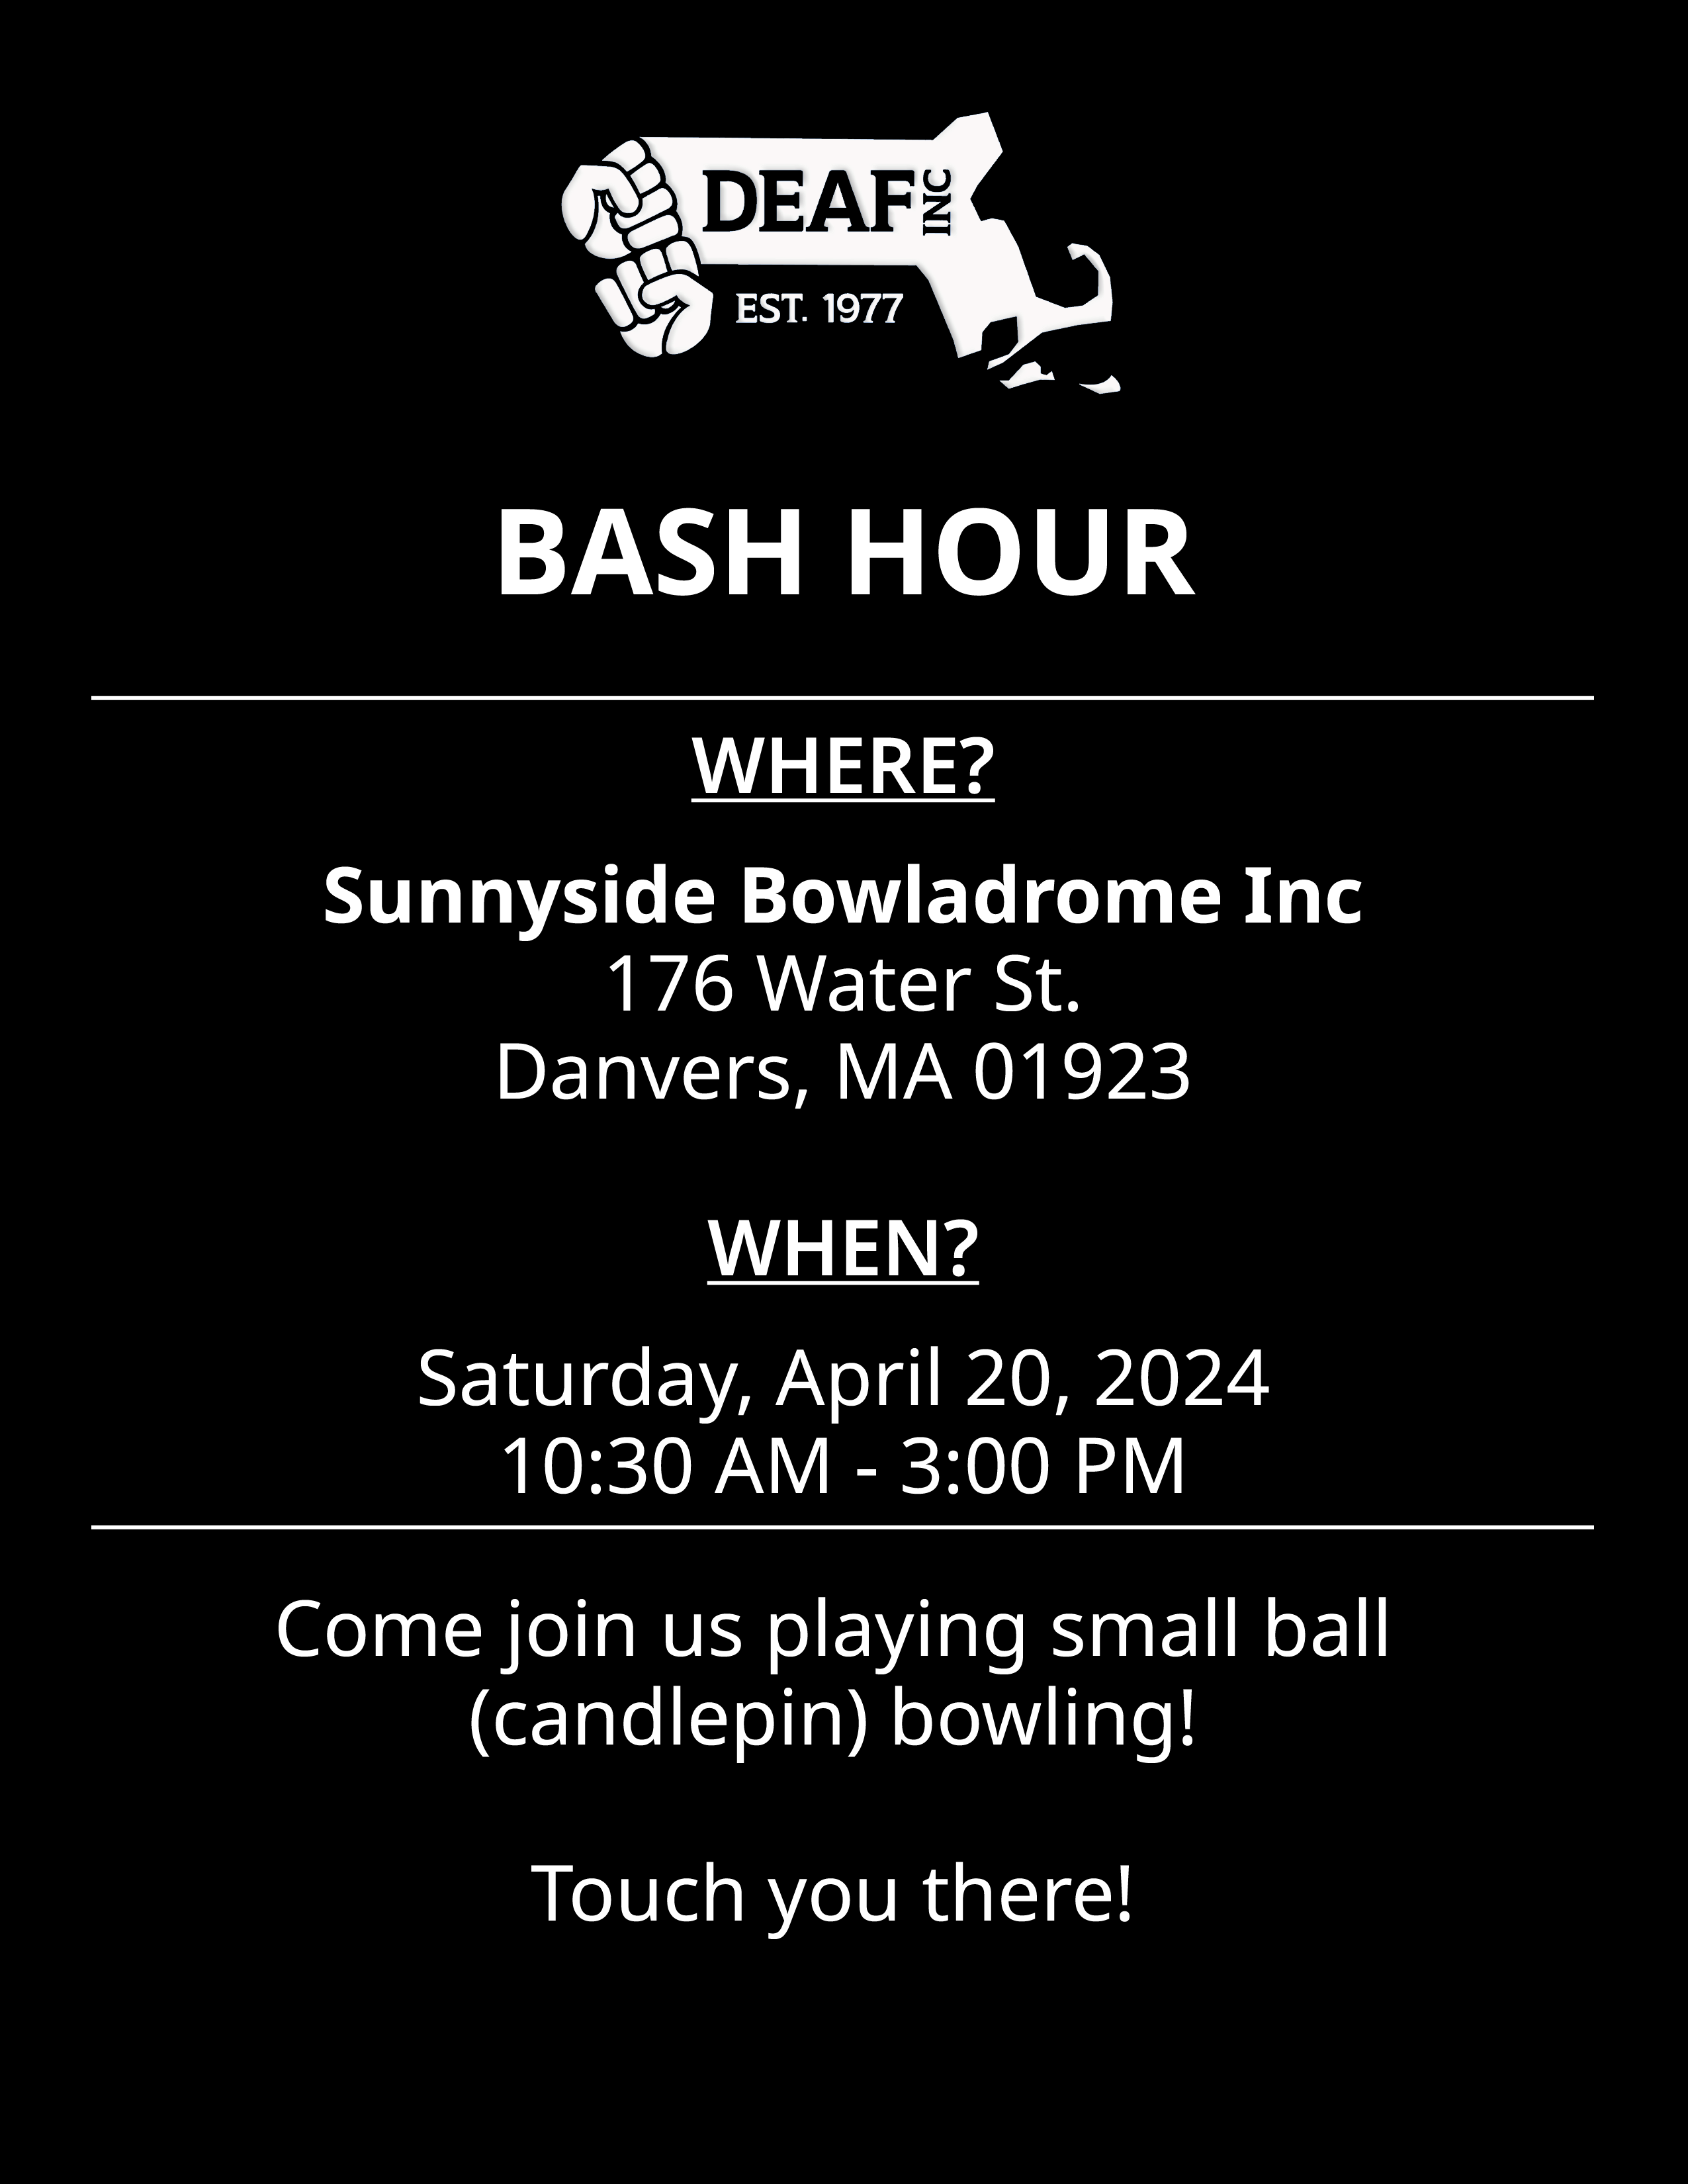 Image Description: Black and white BASH HOUR flyer with white DEAF, Inc. logo at the top. WHERE? Sunnyside Bowladrome Inc, 176 Water St. Danvers, MA 01923. WHEN? Saturday, April 20, 2024, 10:30 AM - 3:00 PM. Come join us playing small ball (candlepin) bowling! Touch you there!